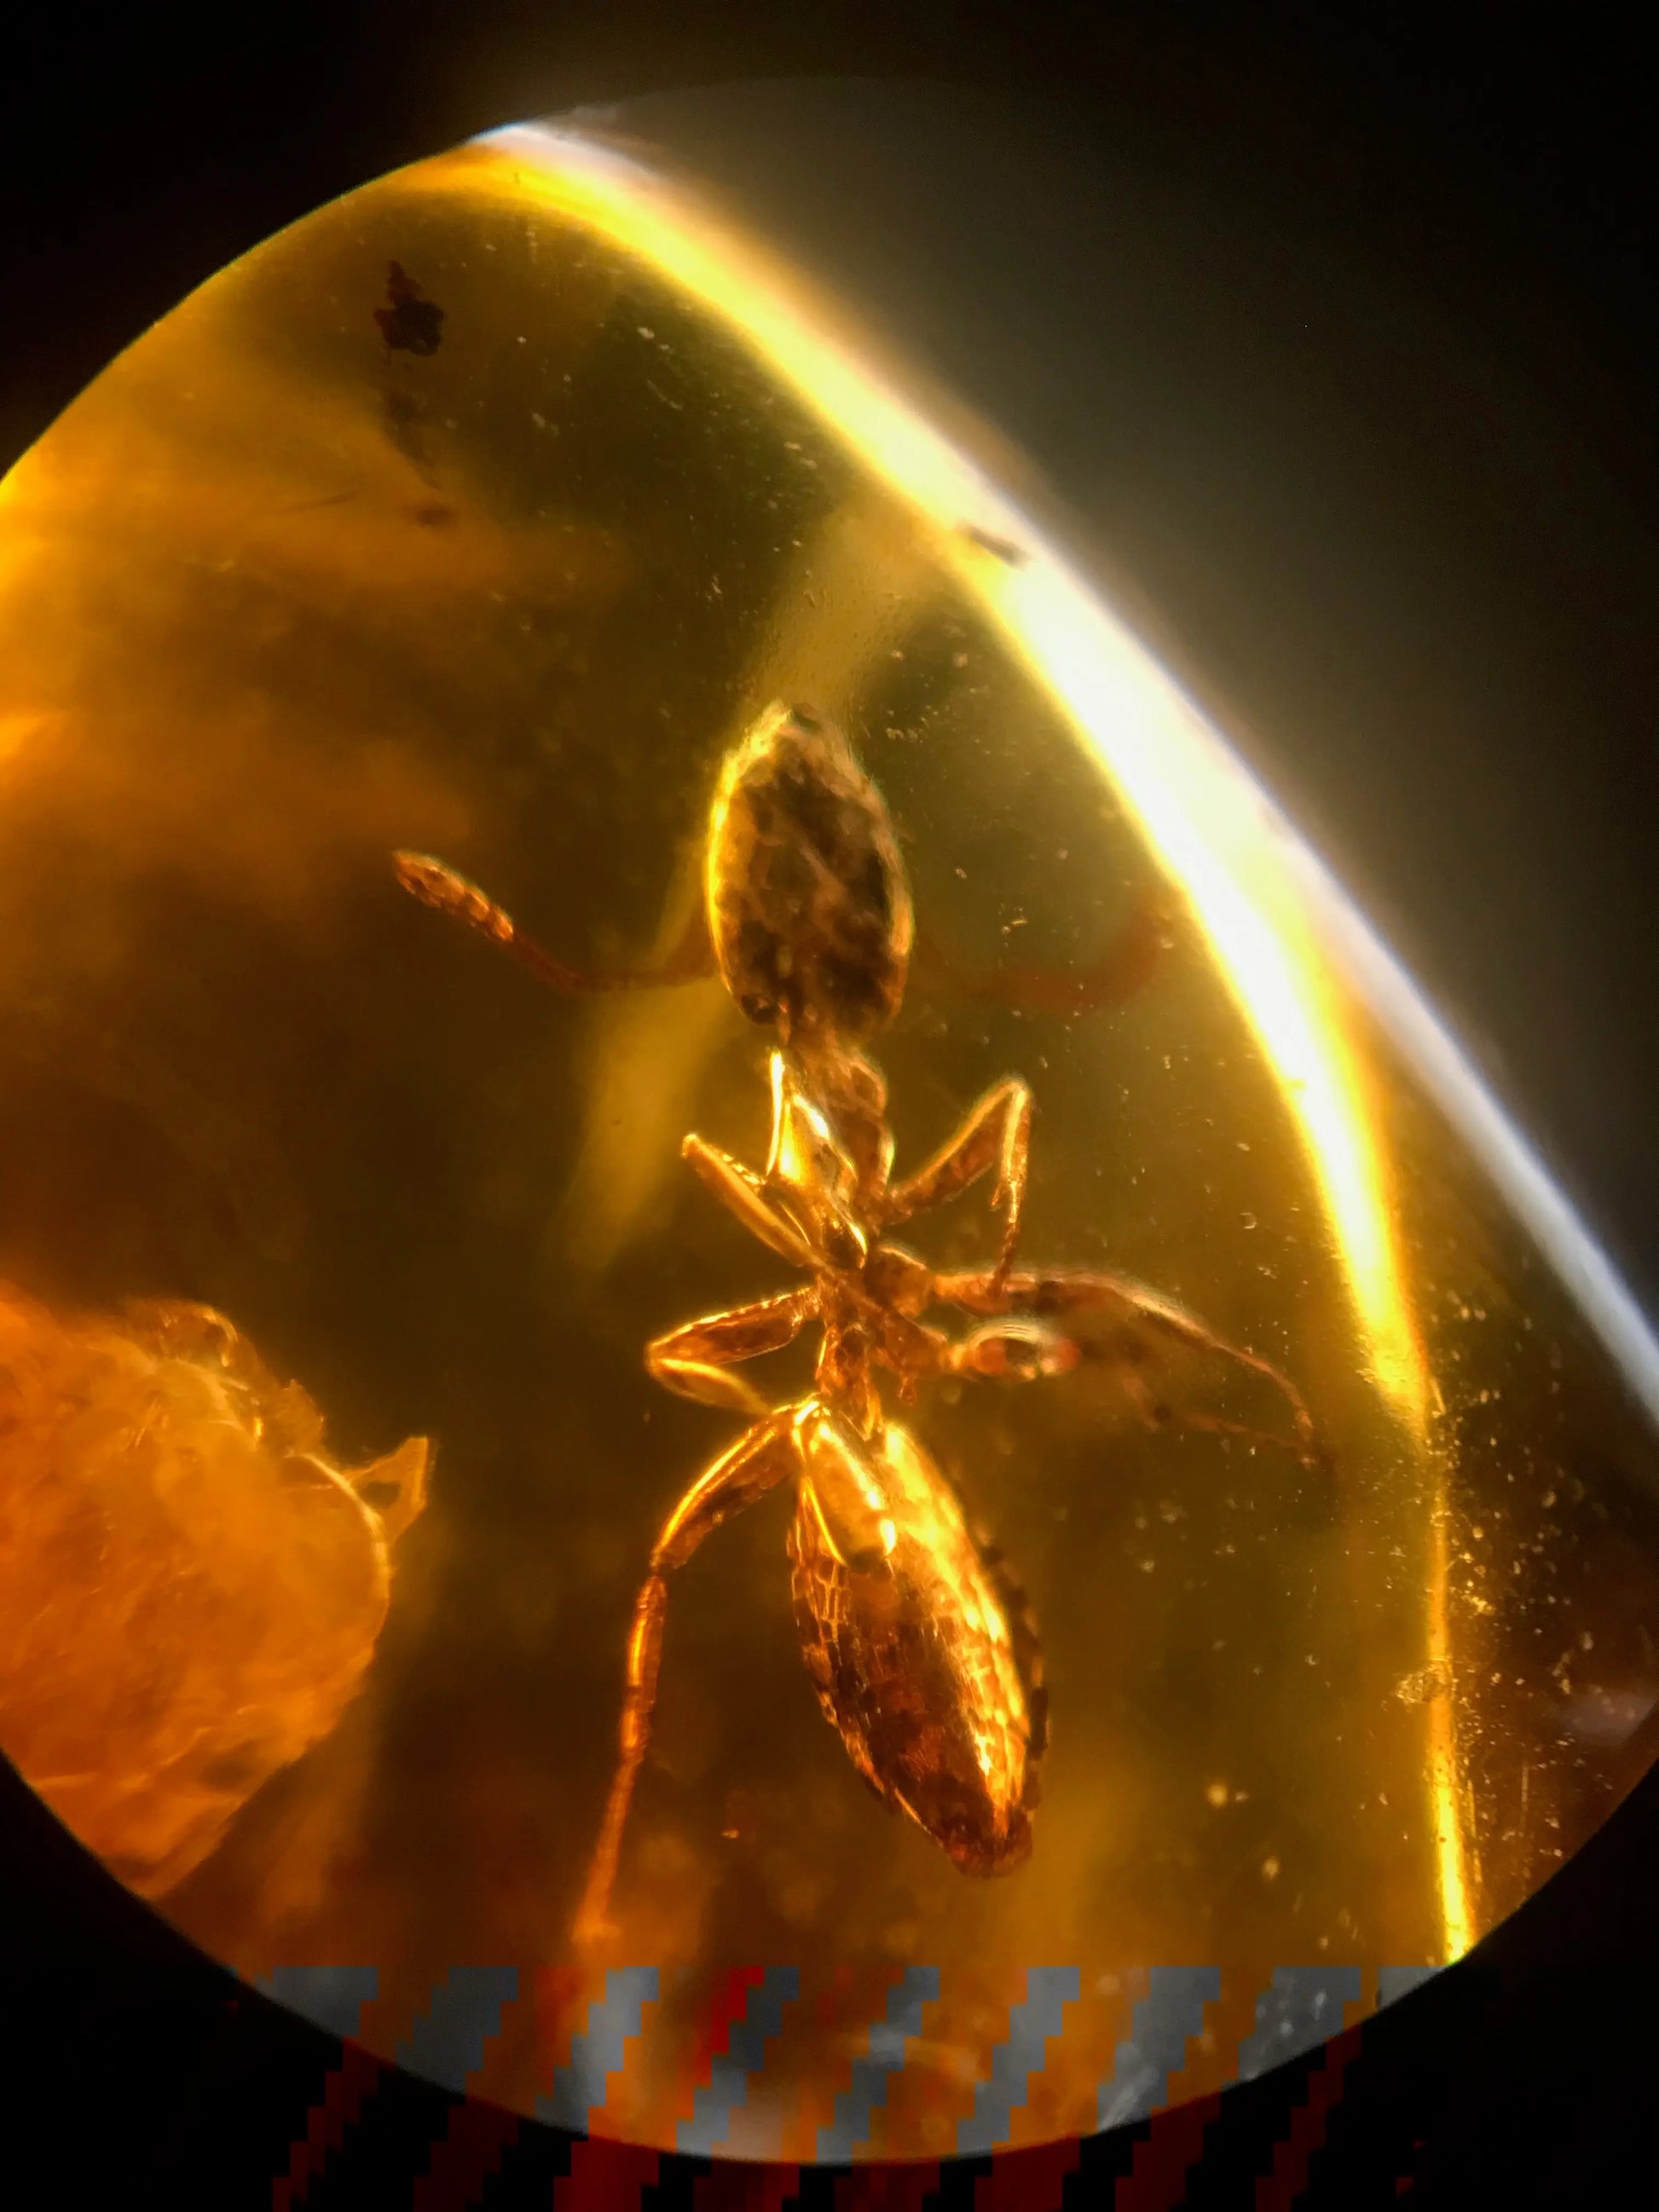 Fossilized Insect in Amber - Stemcell Science Shop